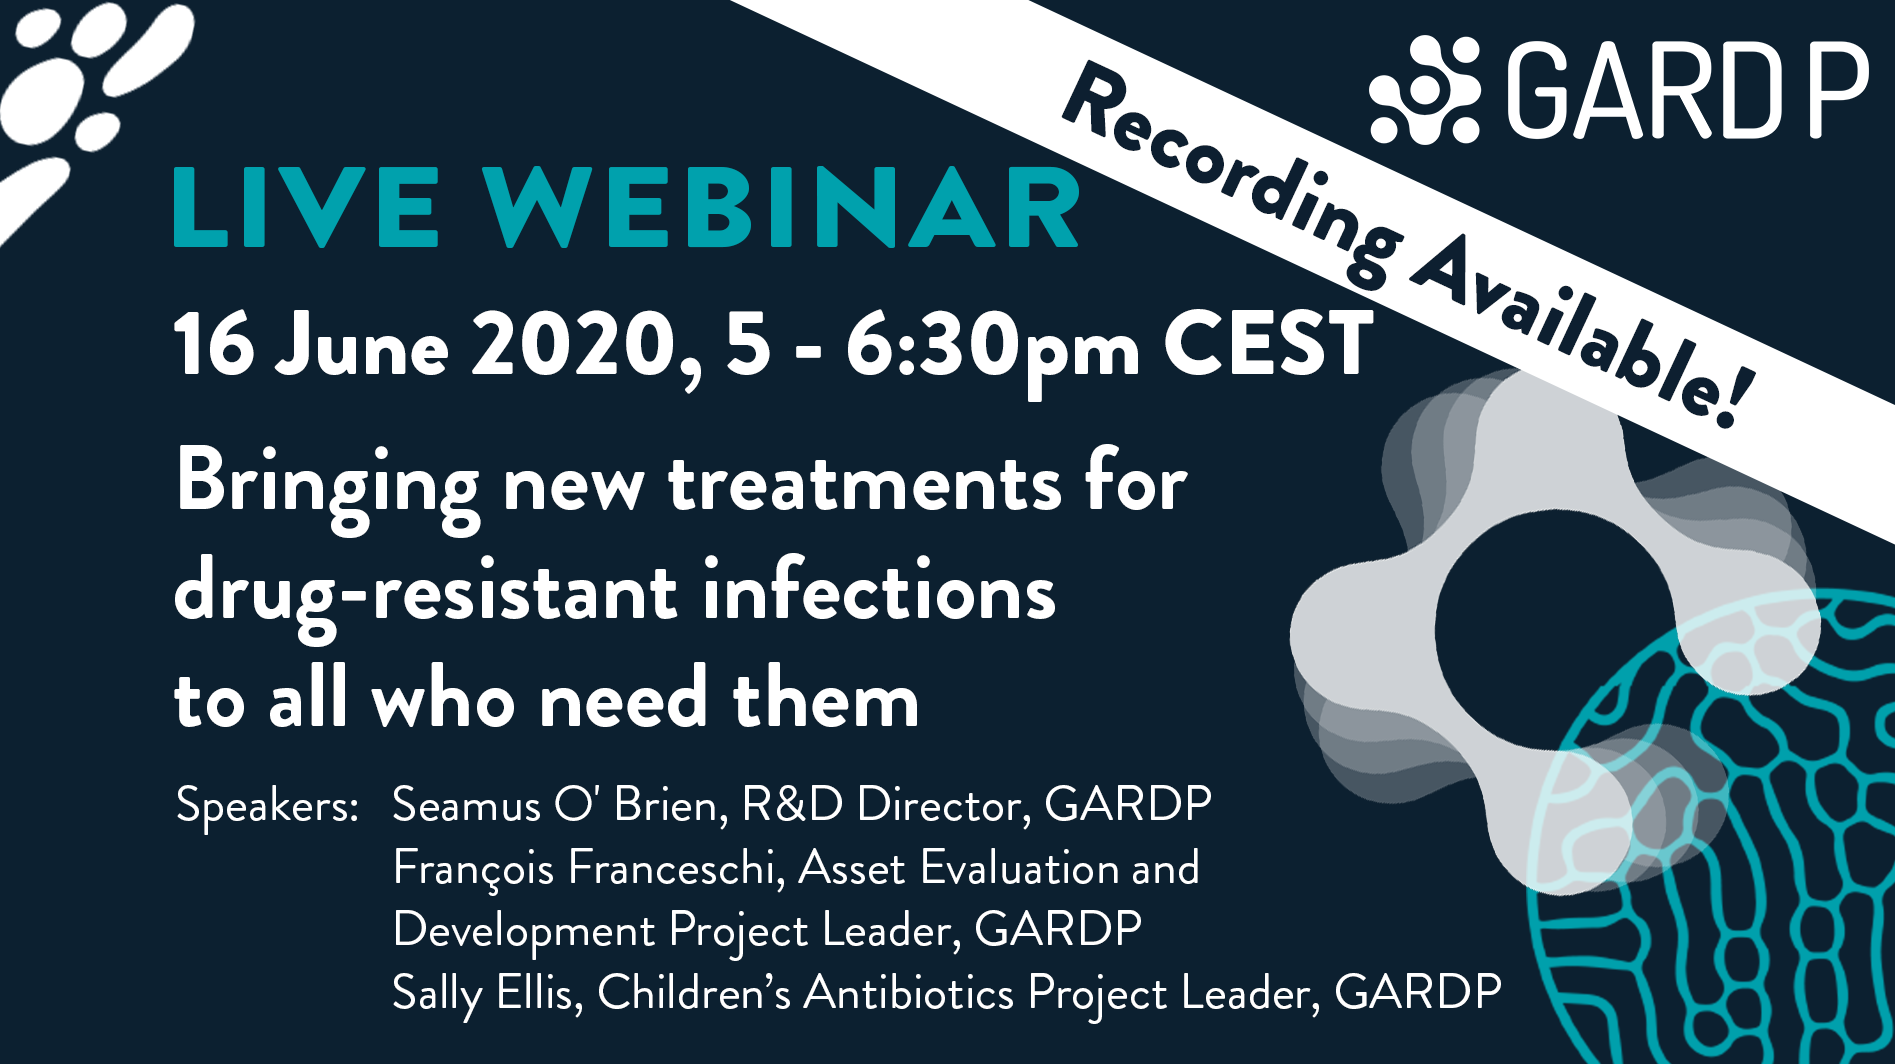 GARDP: Bringing new treatments for drug-resistant infections to all who need them